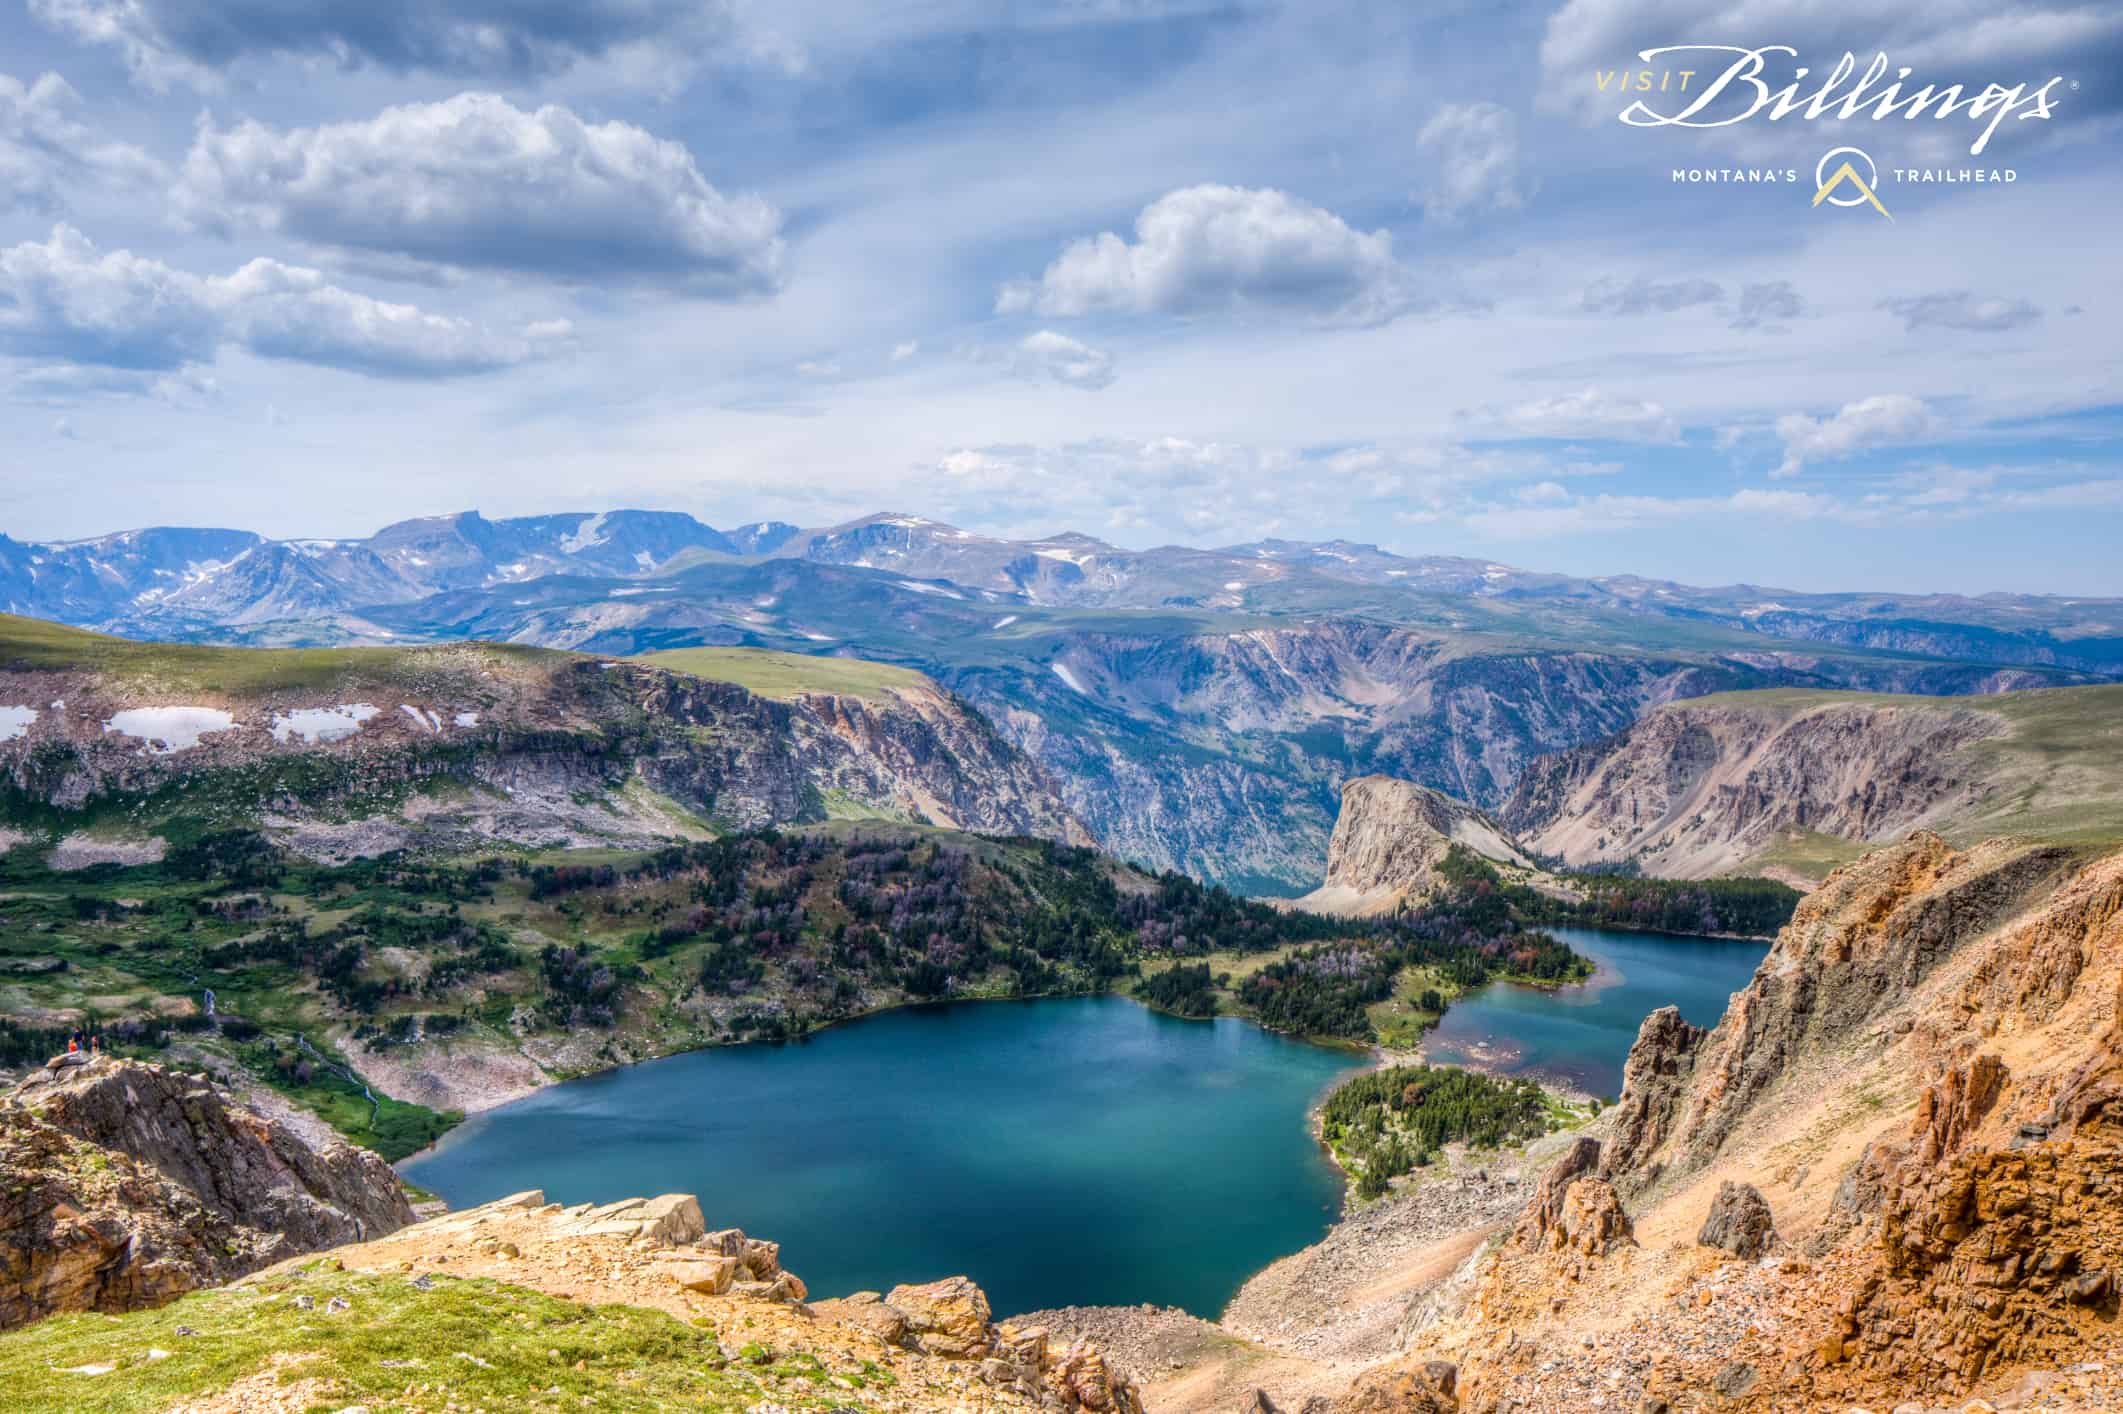 Best things to do in Billings Montana - Jim Markel - Beartooth Pass photo by Visit Billings